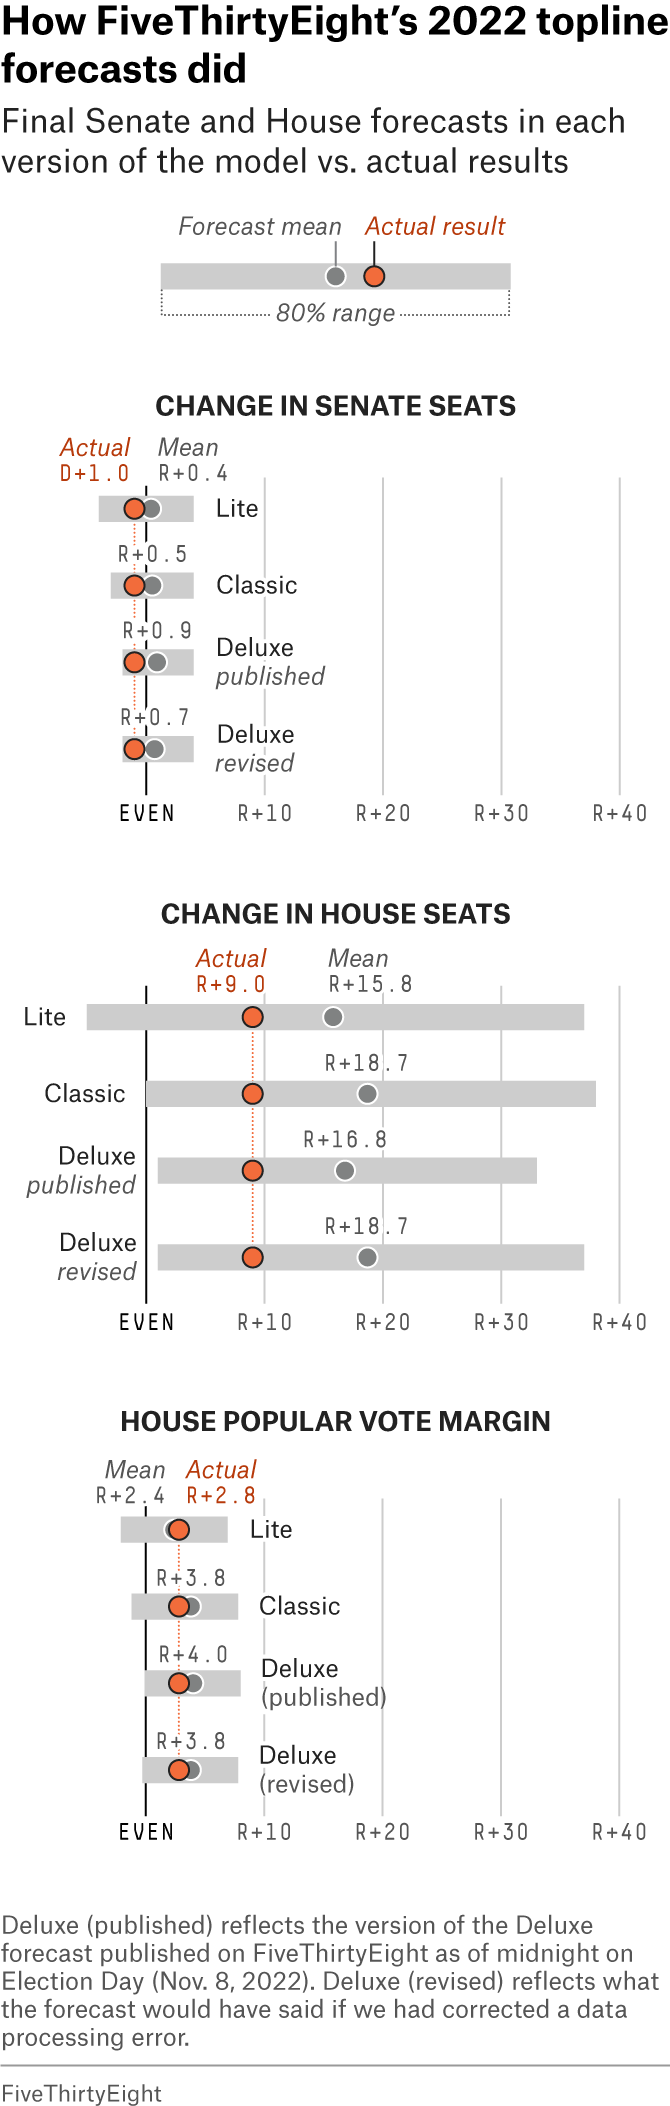 Dot plot with 80% confidence intervals of the final Senate and House forecasts in each version of FiveThirtyEight’s 2022 model versus actual election results, showing how well FiveThirtyEight’s 2022 topline forecast performed. Overall, election results were relatively close to forecast means and were within 80% confidence intervals for all model types for both the Senate and House.